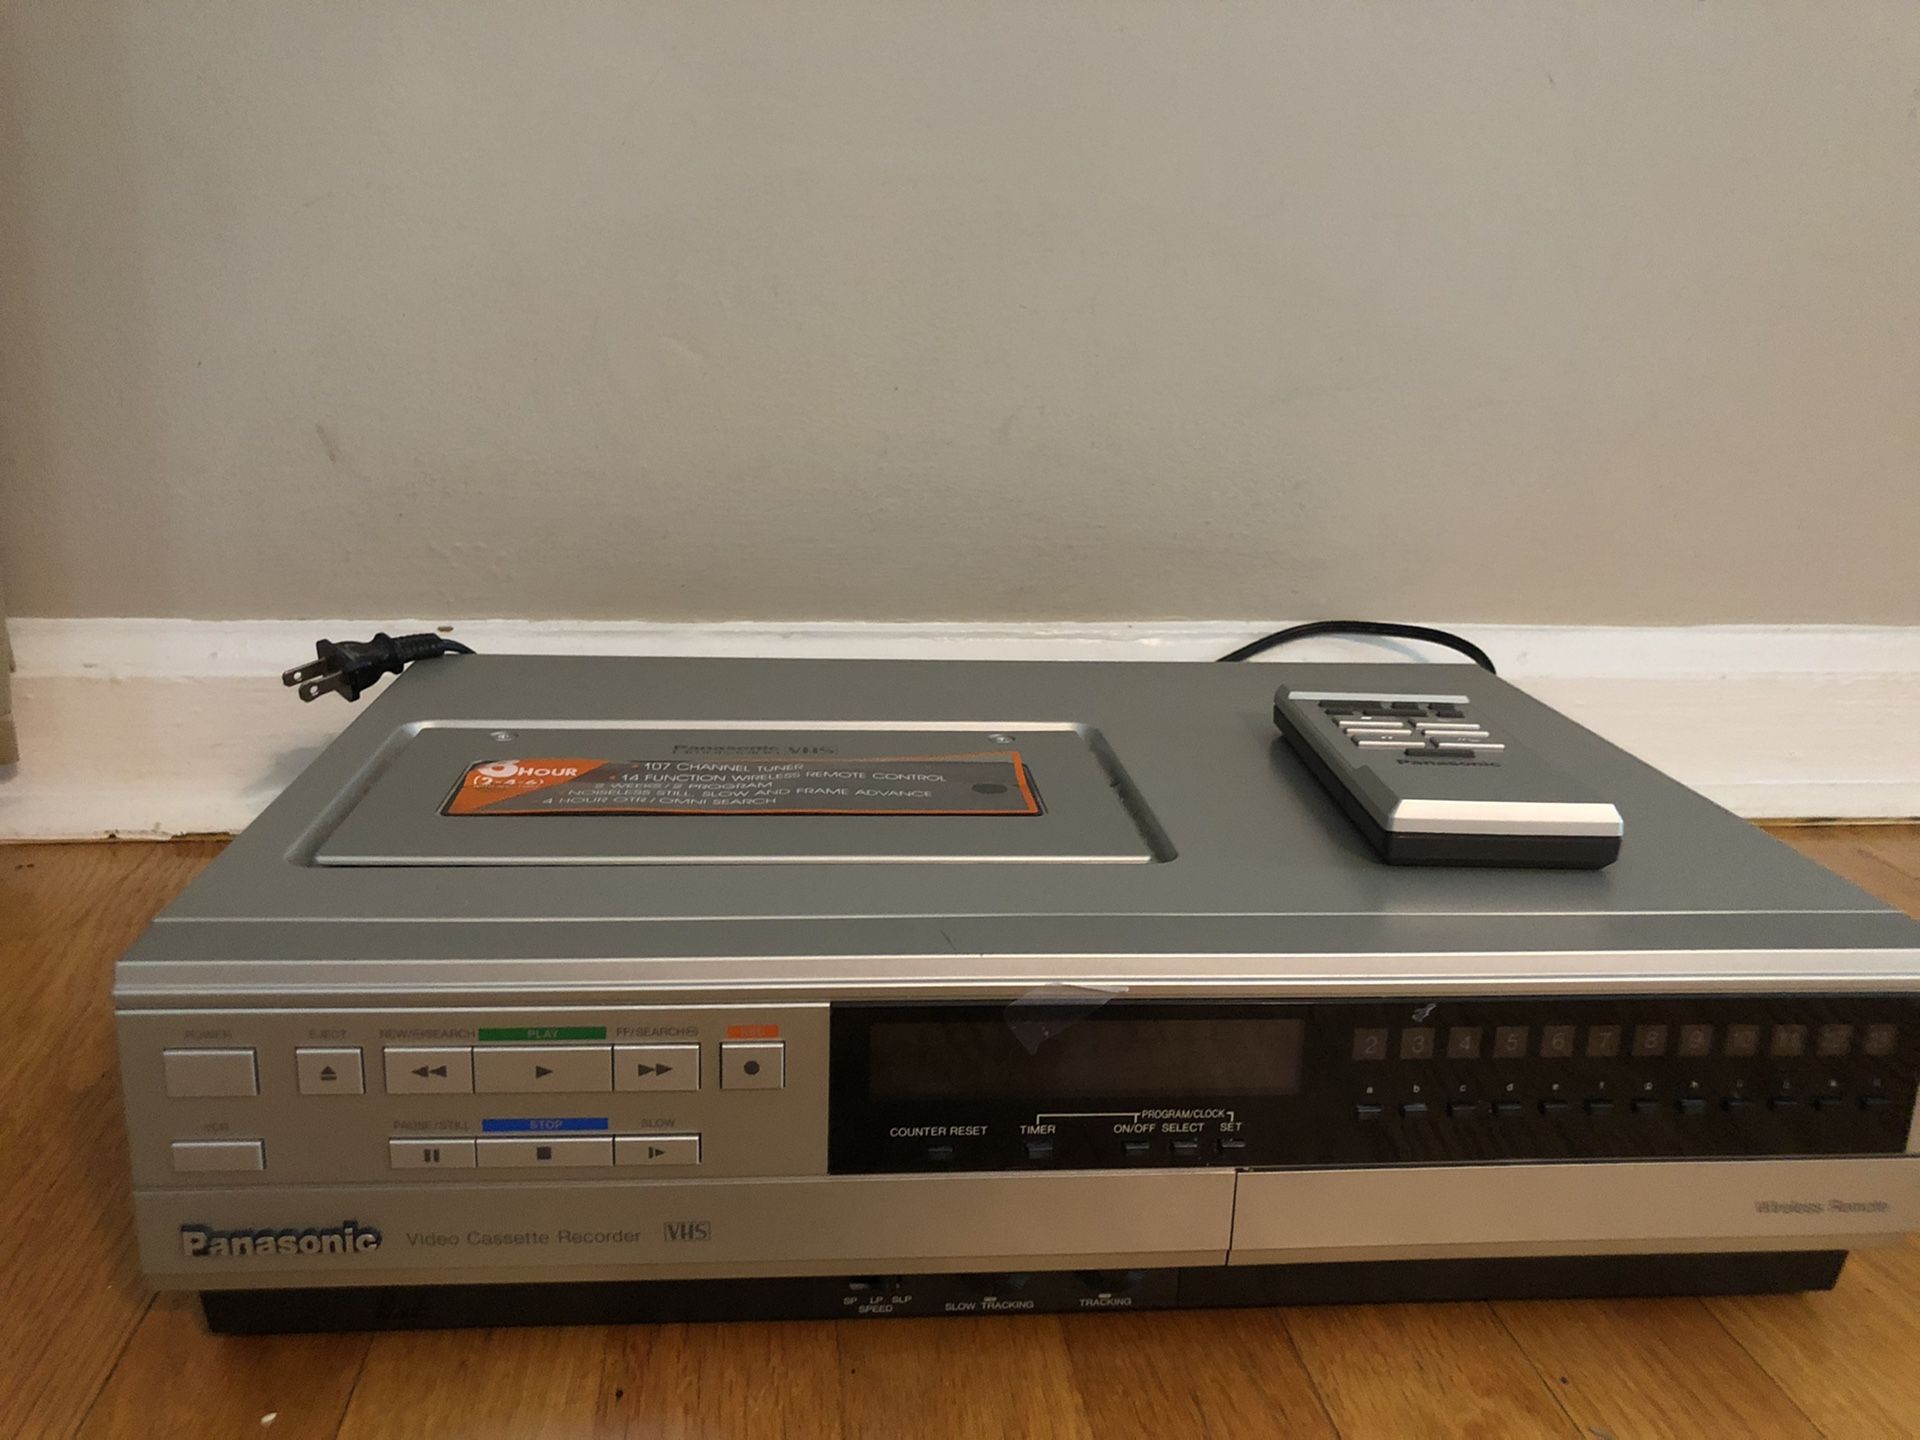 Panasonic VHS Omnivision VCR PV-1231R With Wireless Remote.